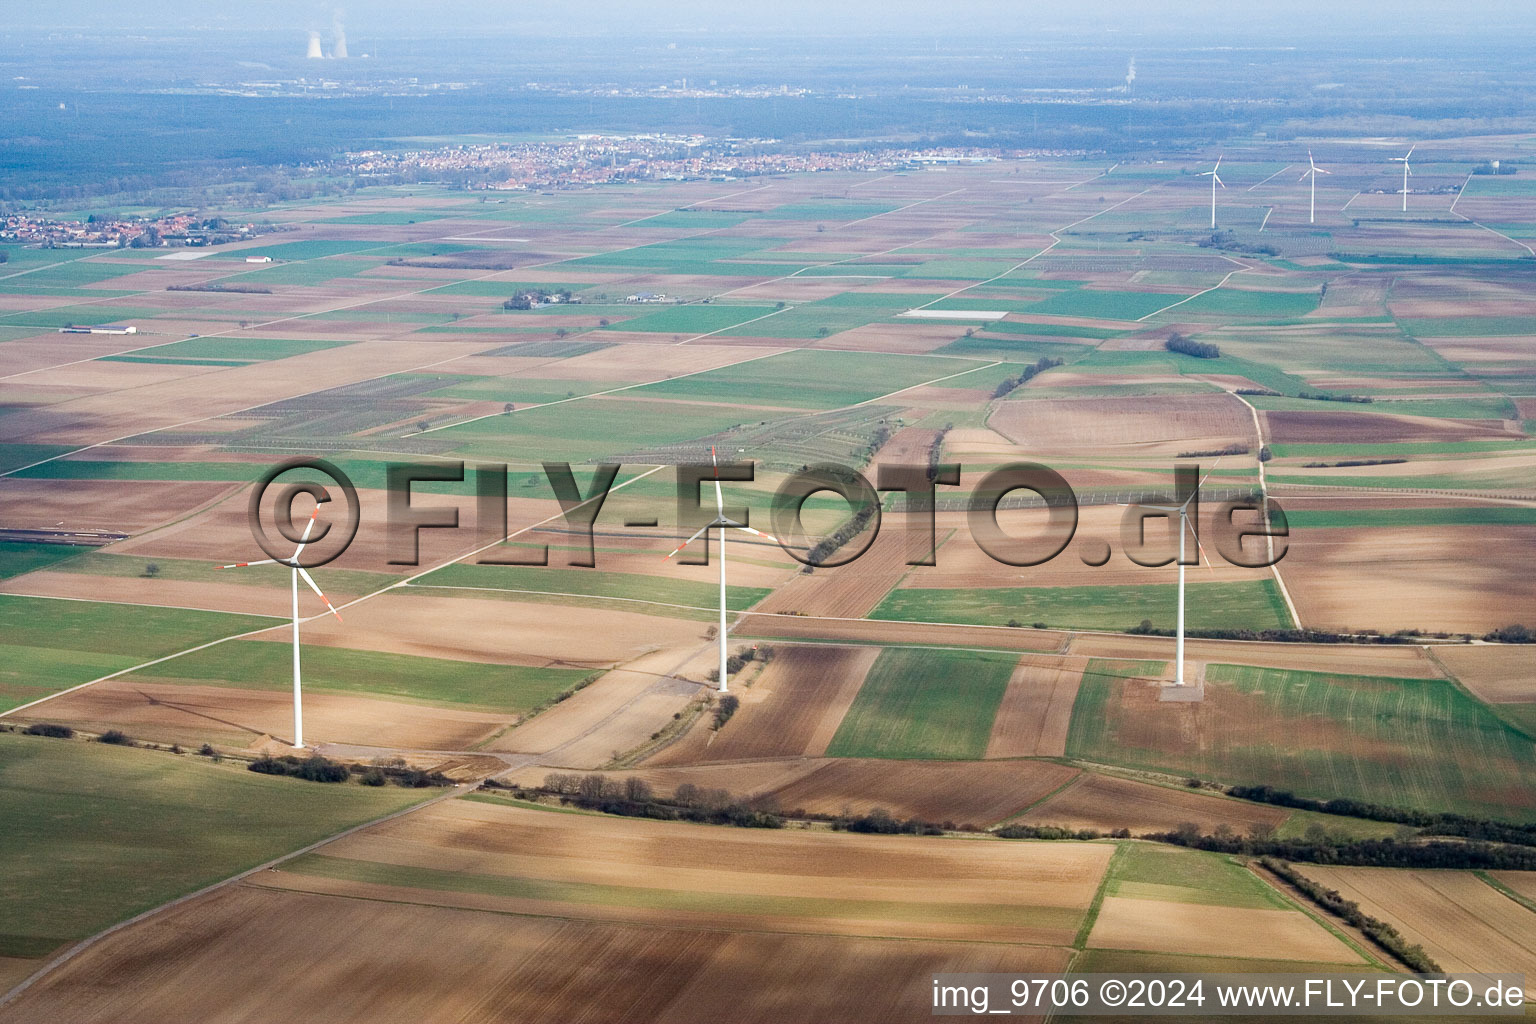 Wind turbines in Offenbach an der Queich in the state Rhineland-Palatinate, Germany from above